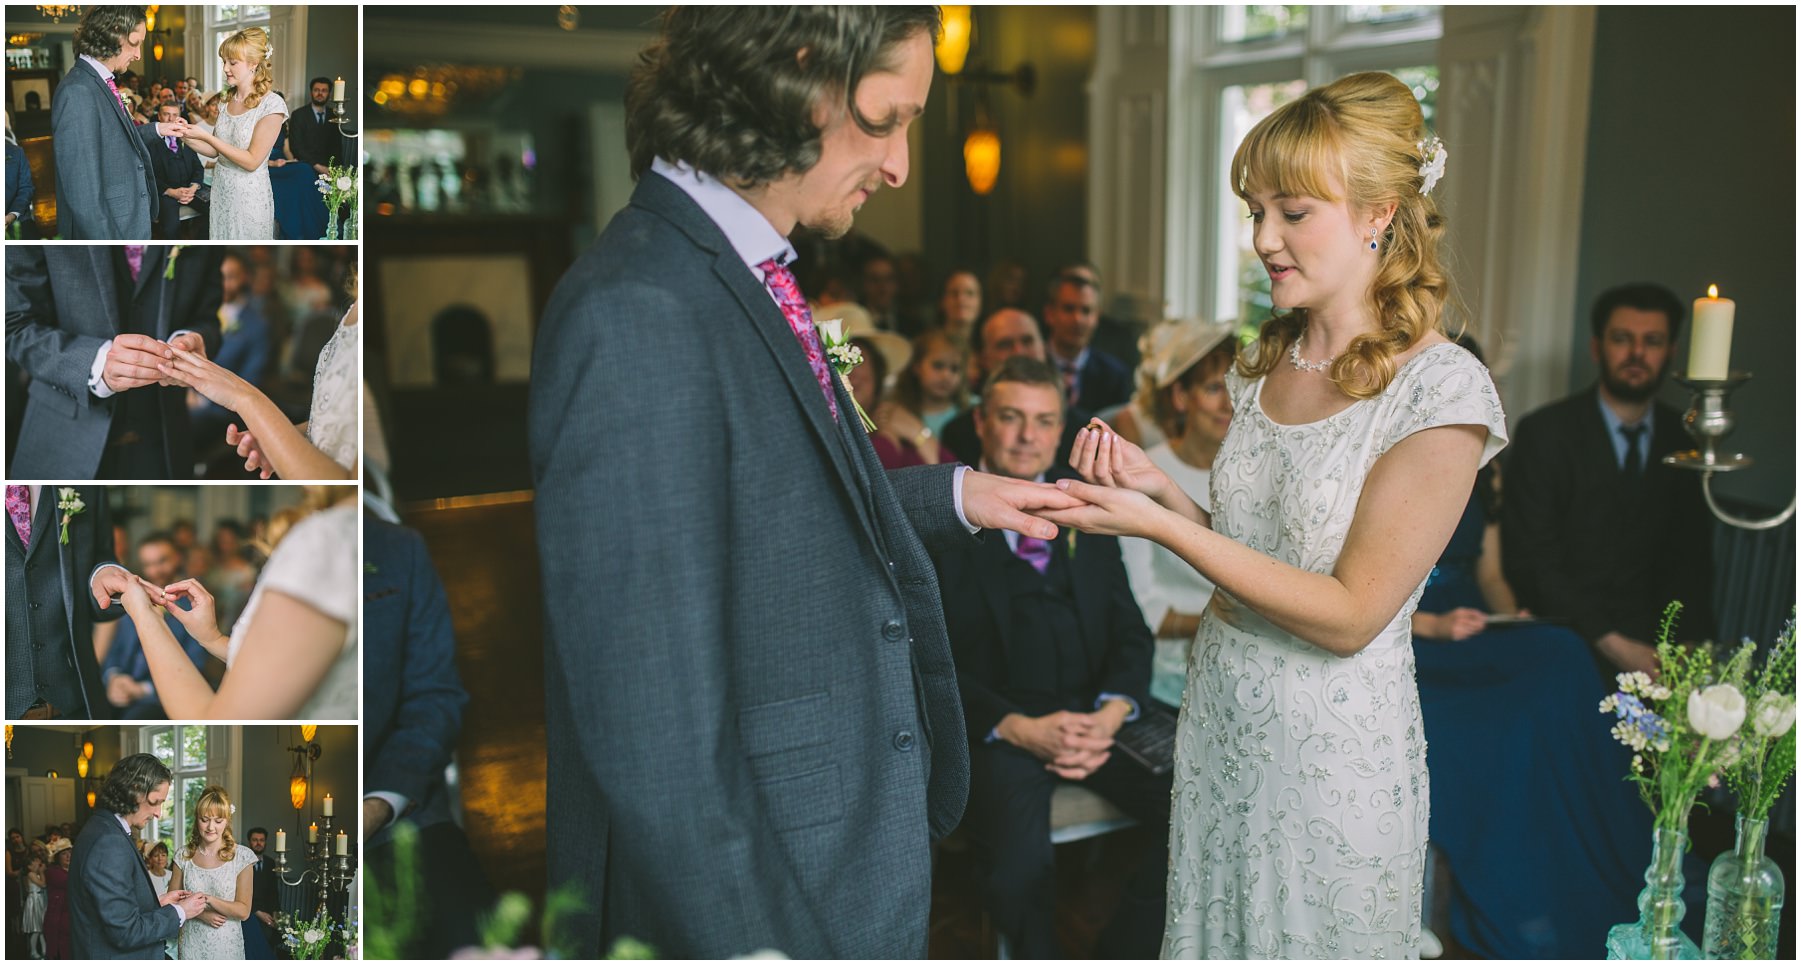 The Exchange of Wedding Rings during a Didsbury House Wedding